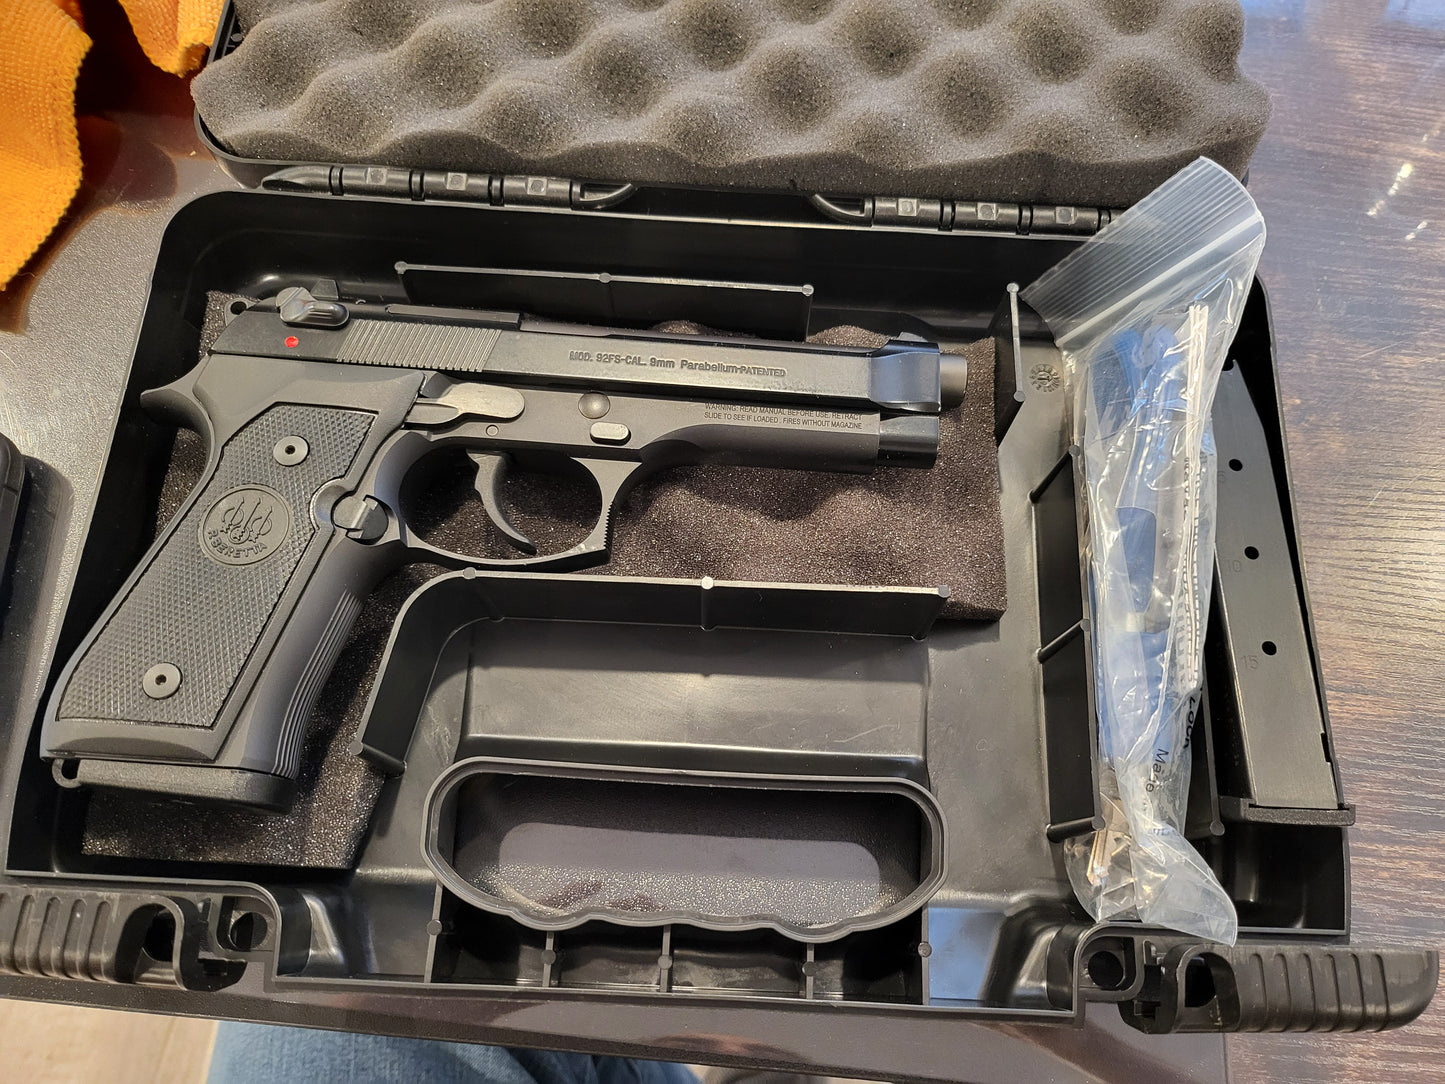 Beretta 92FS full size 4.9 barrel with 2x15 mags 9MM Luger